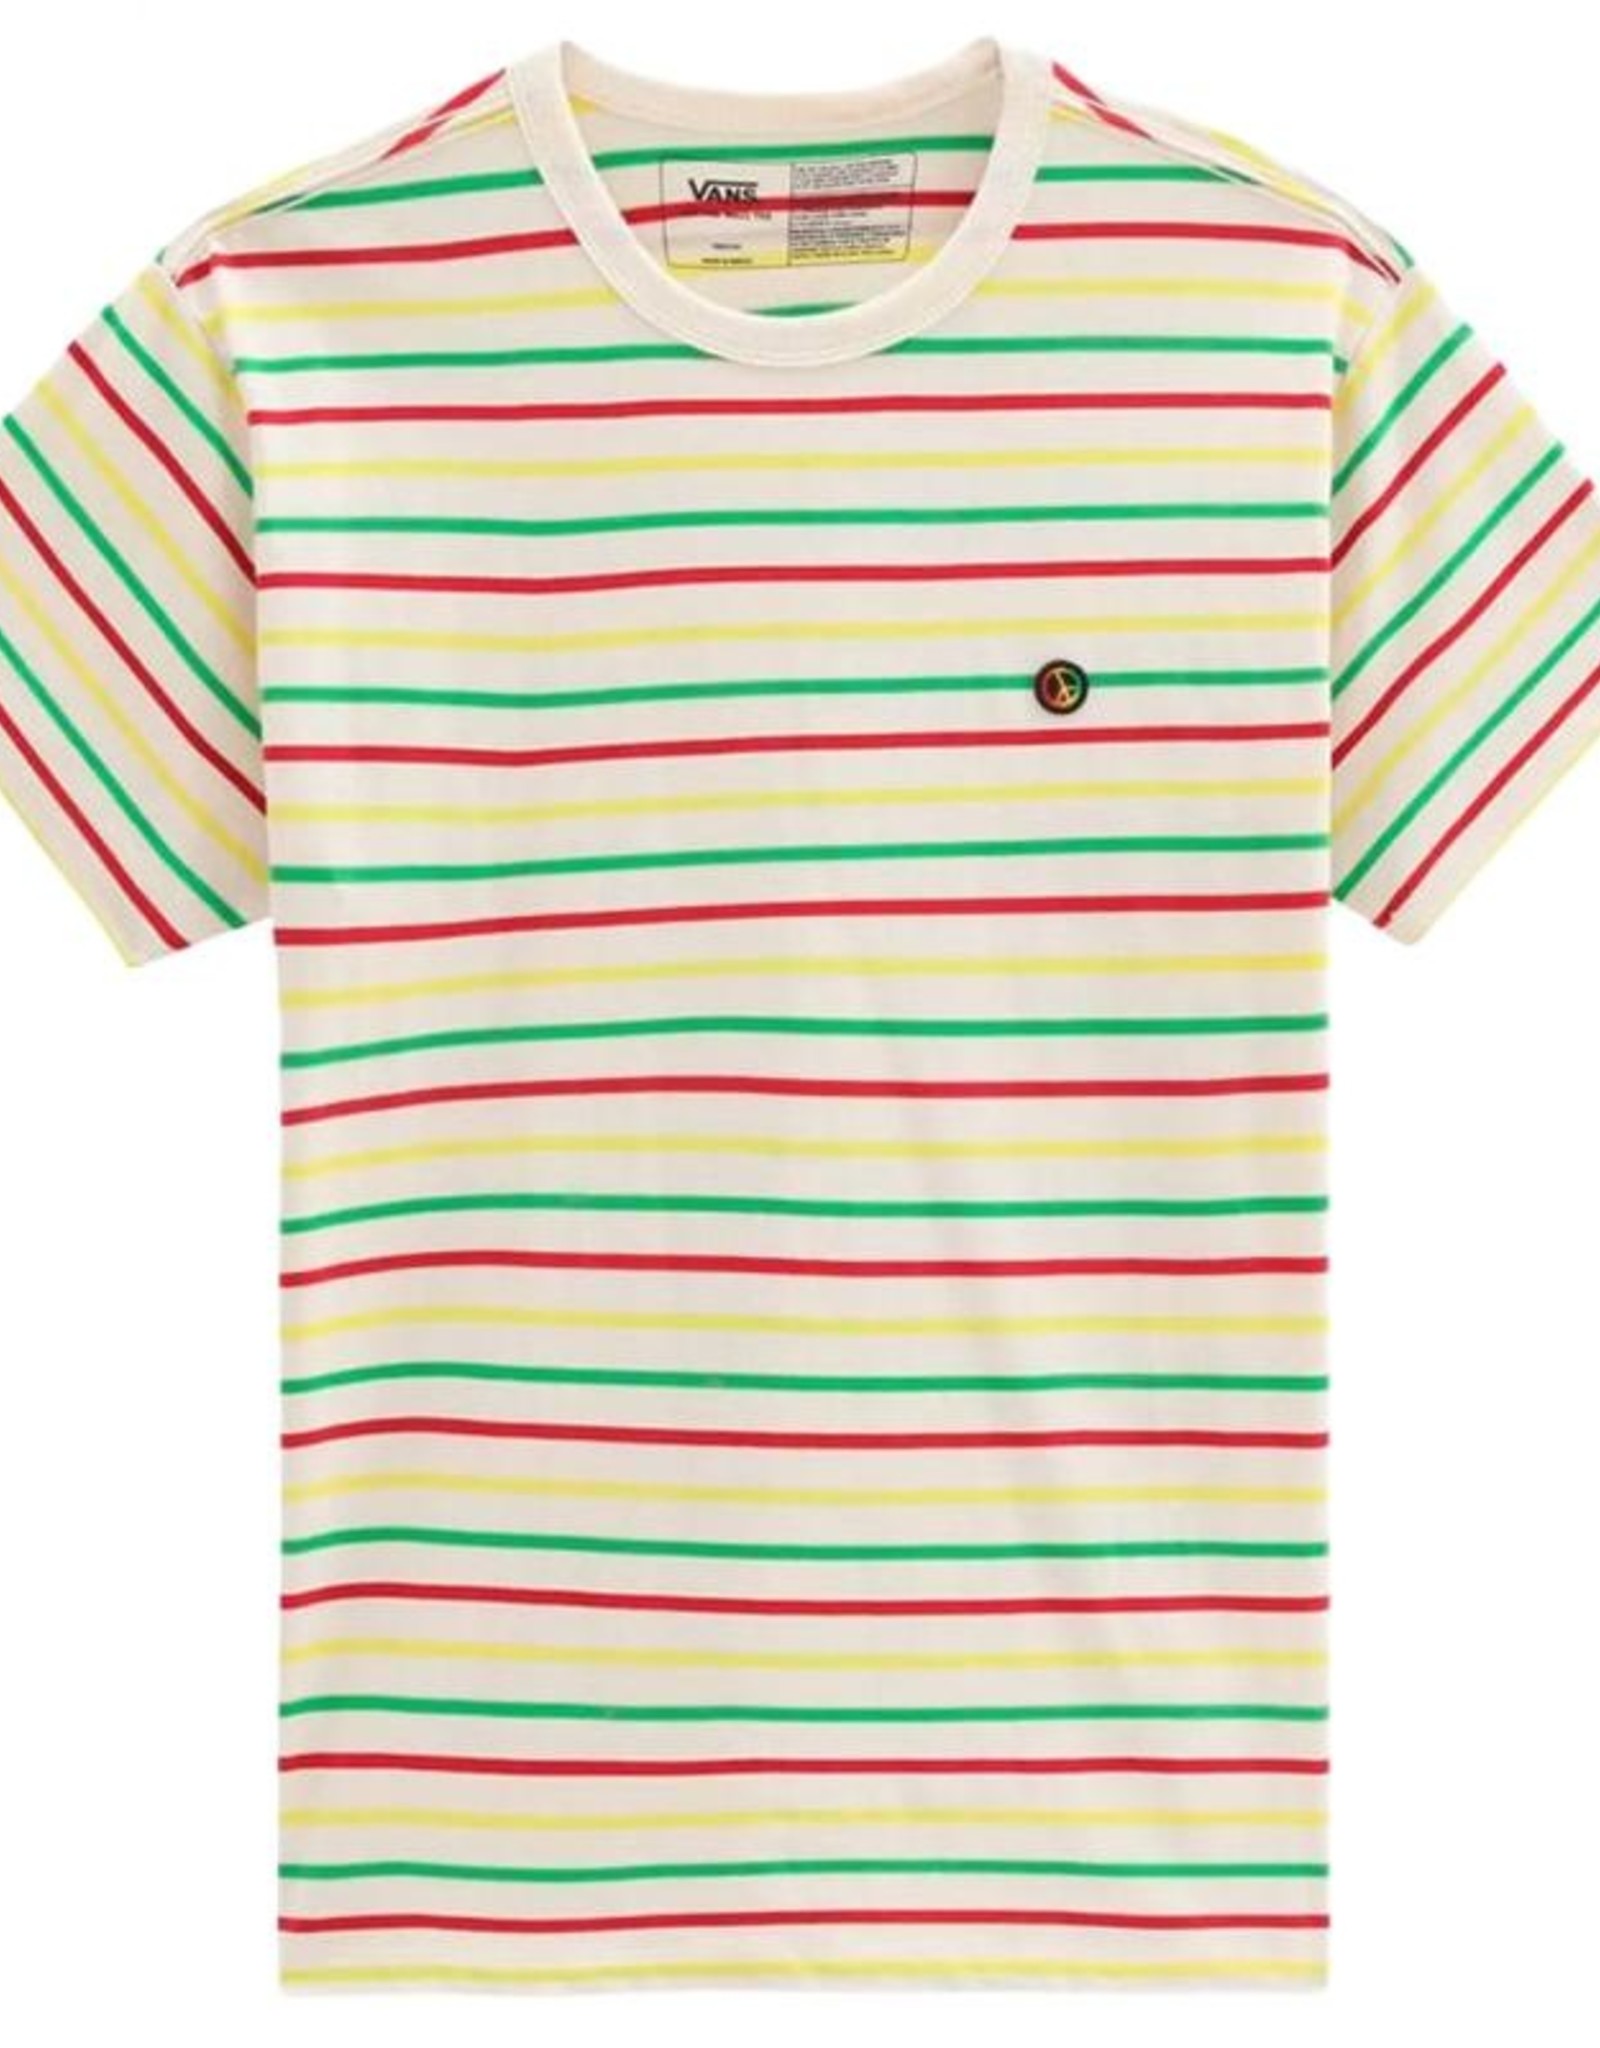 VANS TYSON PETERSON STRIPED OFF THE WALL CLASSIC TEE - WHITE